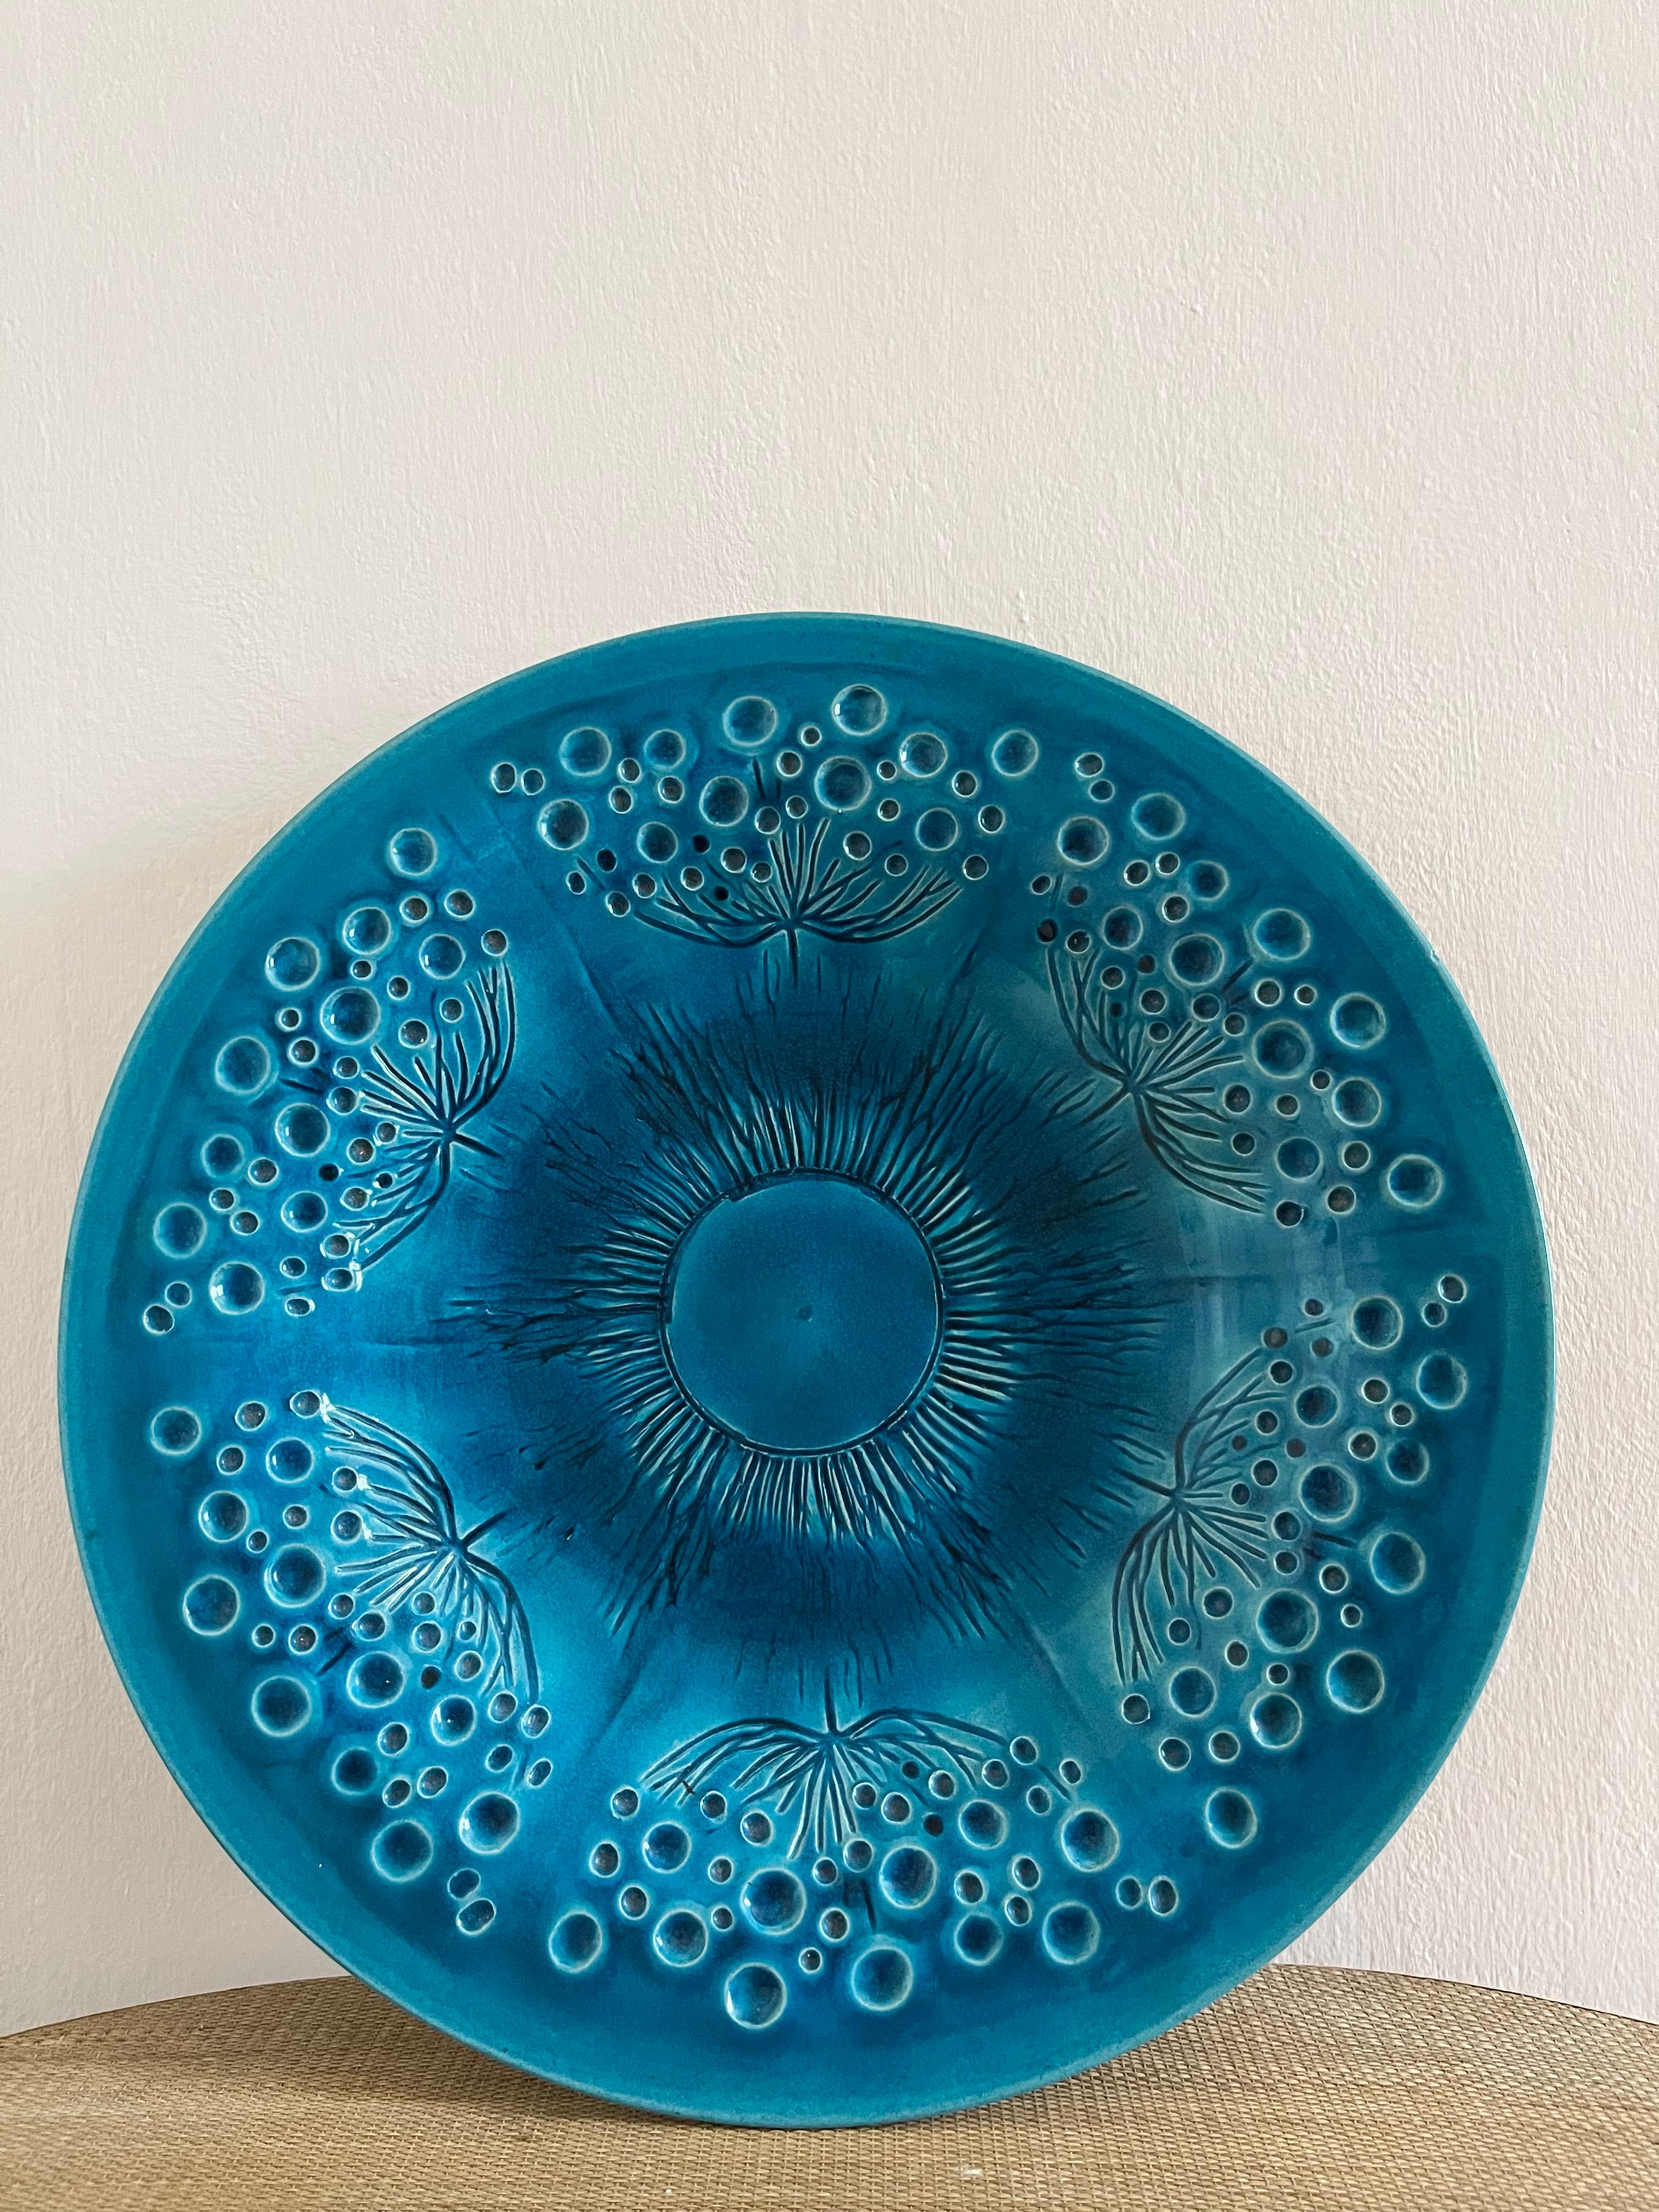 1960/70s large ceramic dish by Kähler with glossy turquoise glaze. Very decorative and great as a statement piece on any table.

Perfect condition, no flaws.

Diameter: 41 cm (16.1 in) // Height: 6 cm (2.4 in).